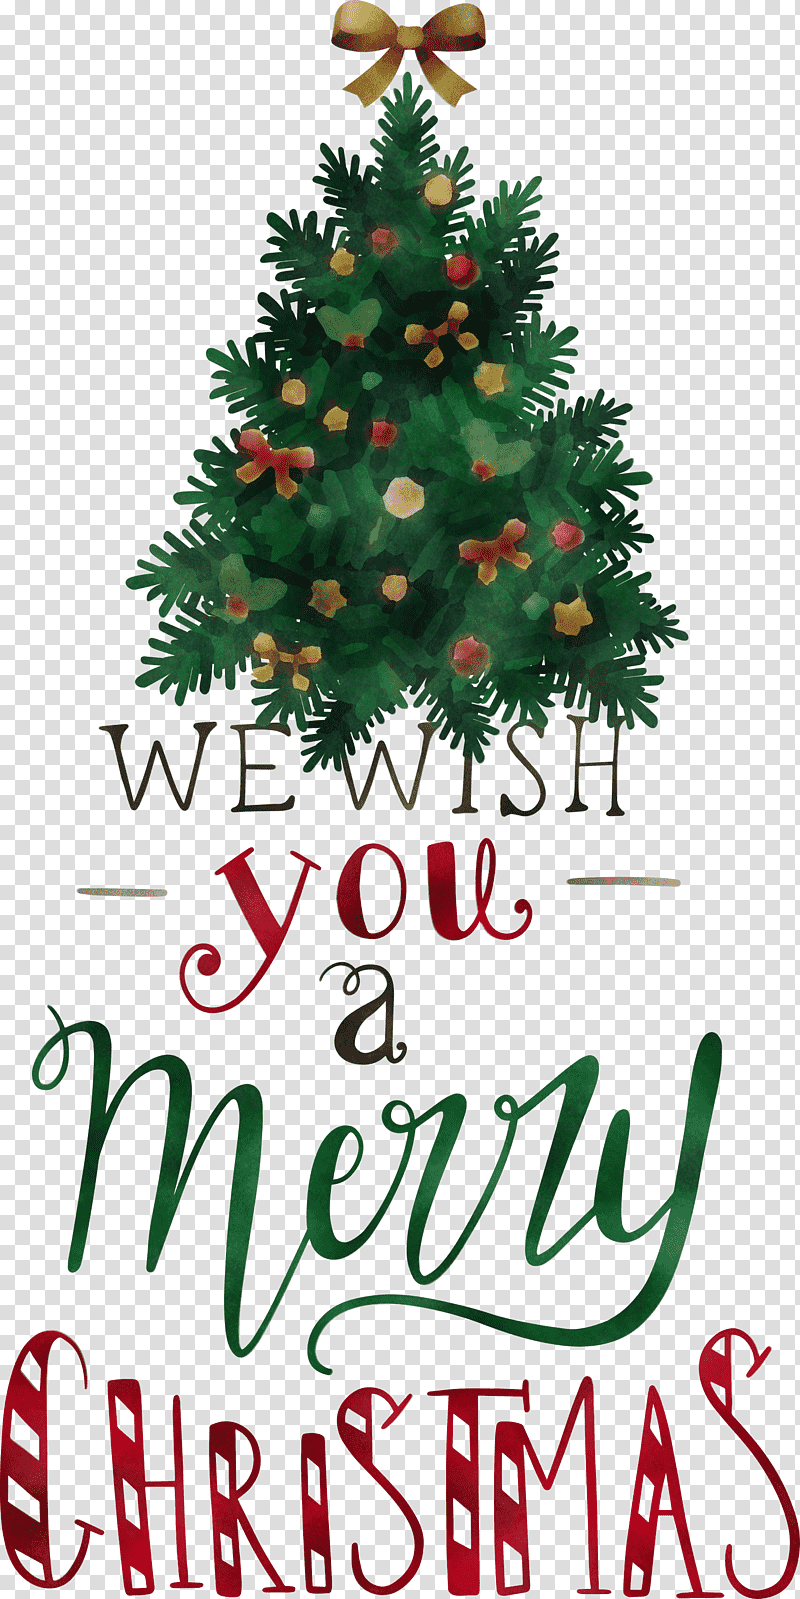 Merry Christmas We Wish You A Merry Christmas, Holiday Ornament, Christmas Tree, Christmas Ornament M, Christmas Day, Spruce, School transparent background PNG clipart